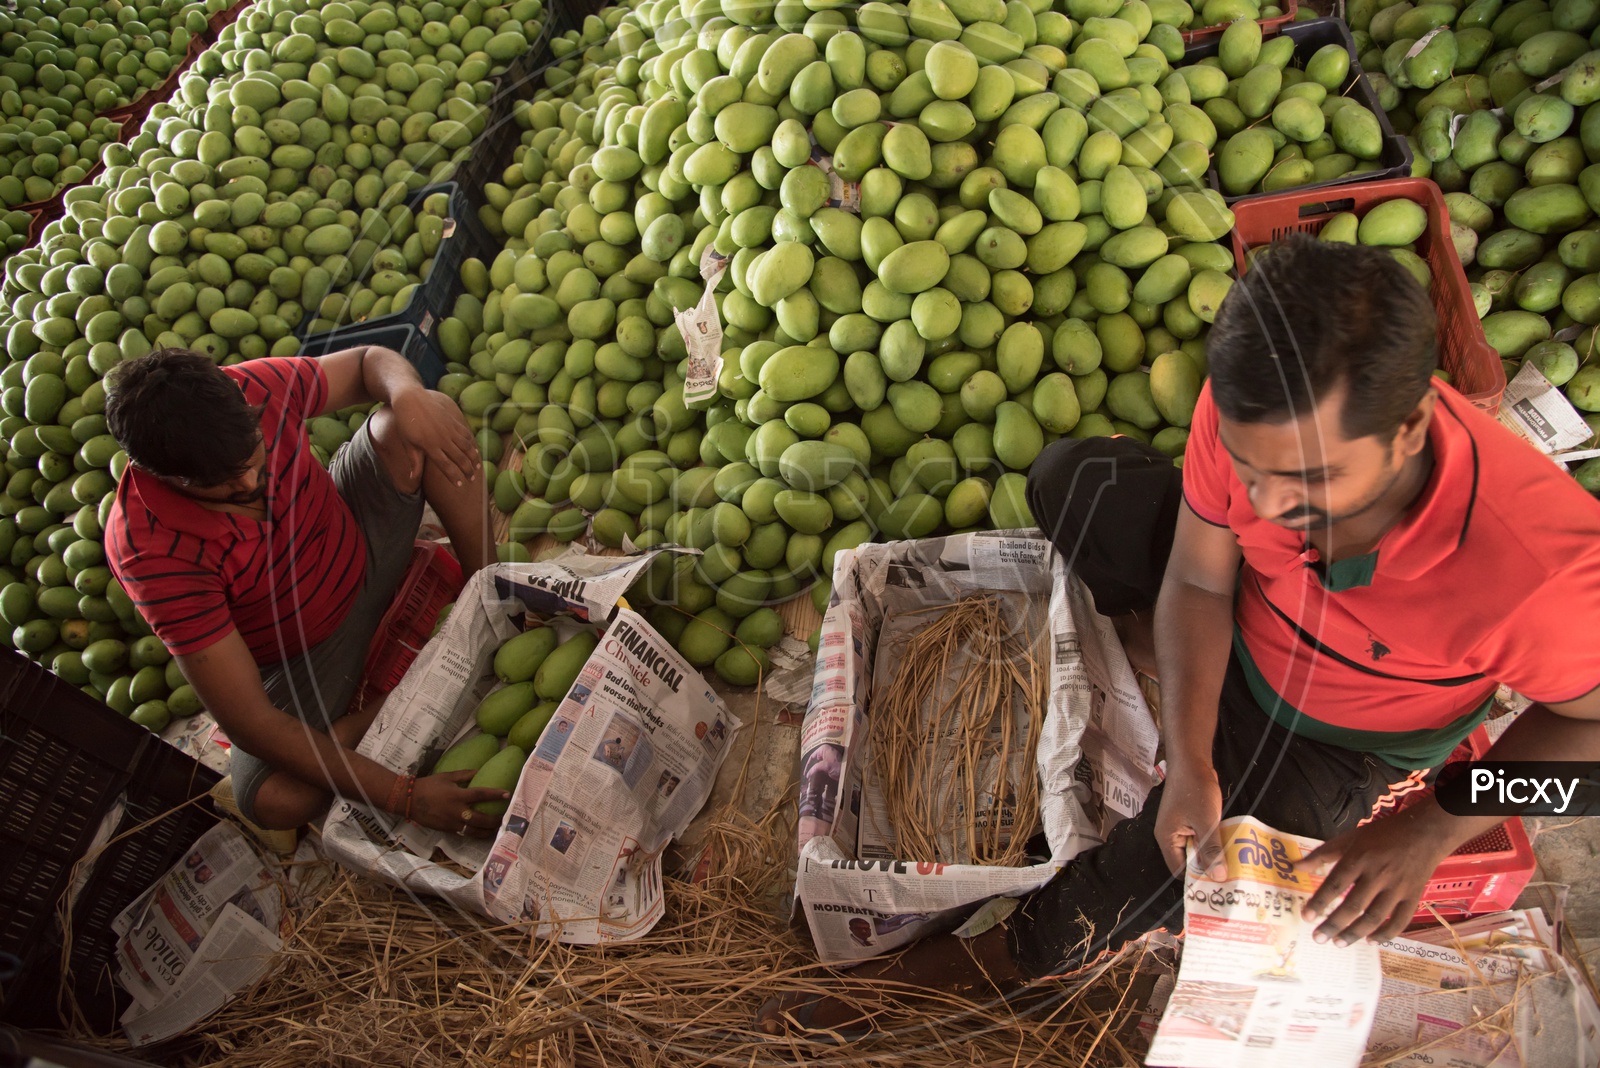 FIlling Mangoes into Baskets in order to Export them to other parts of India.